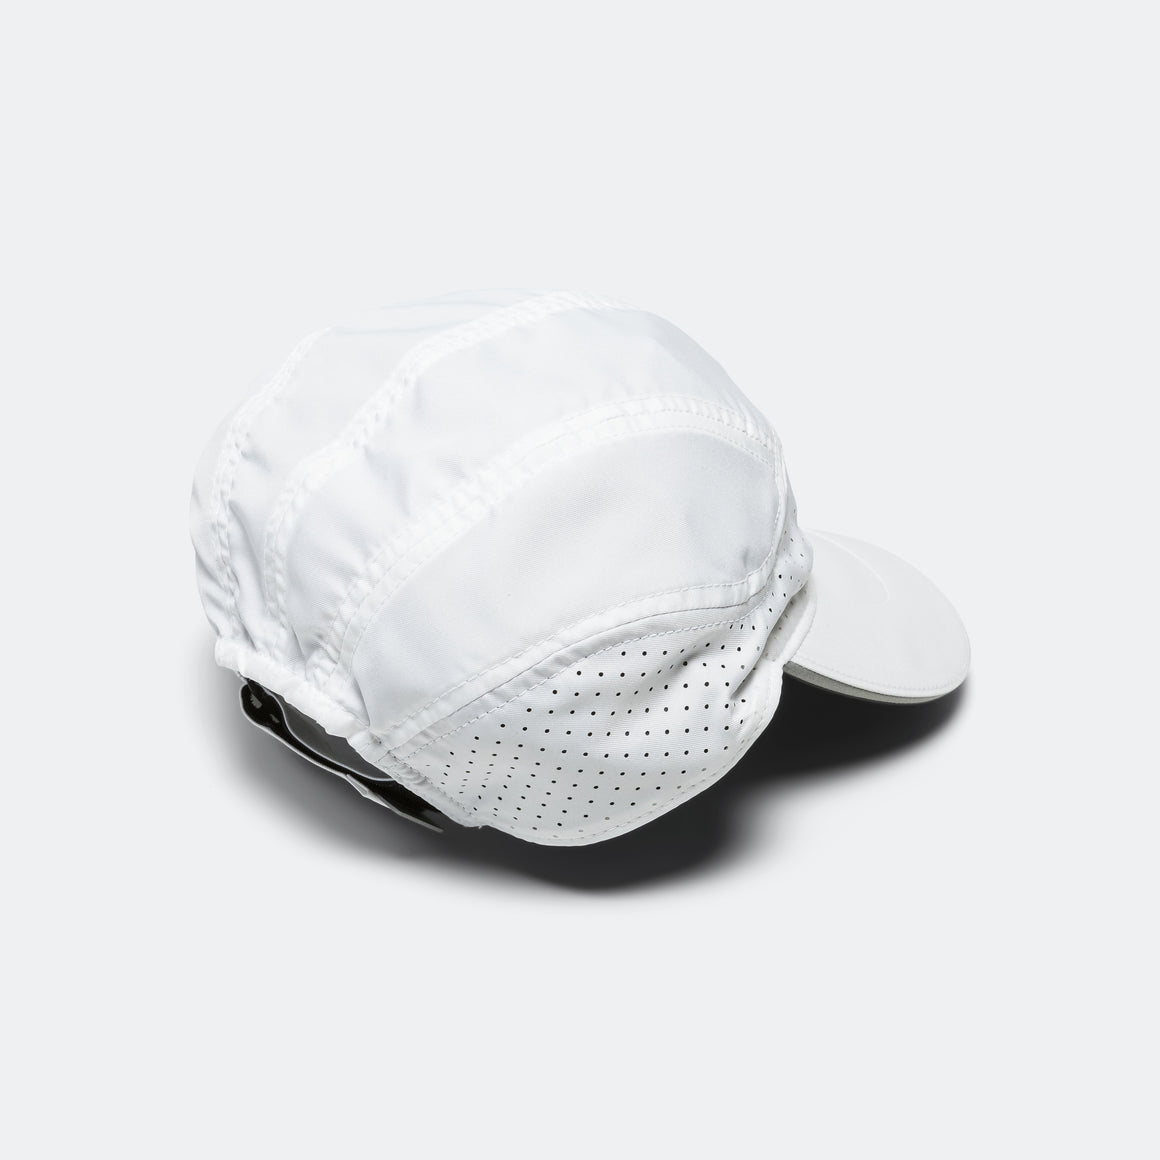 Nike - Dri-FIT ADV Fly Cap - White/Anthracite-Reflective Silver - Up There Athletics